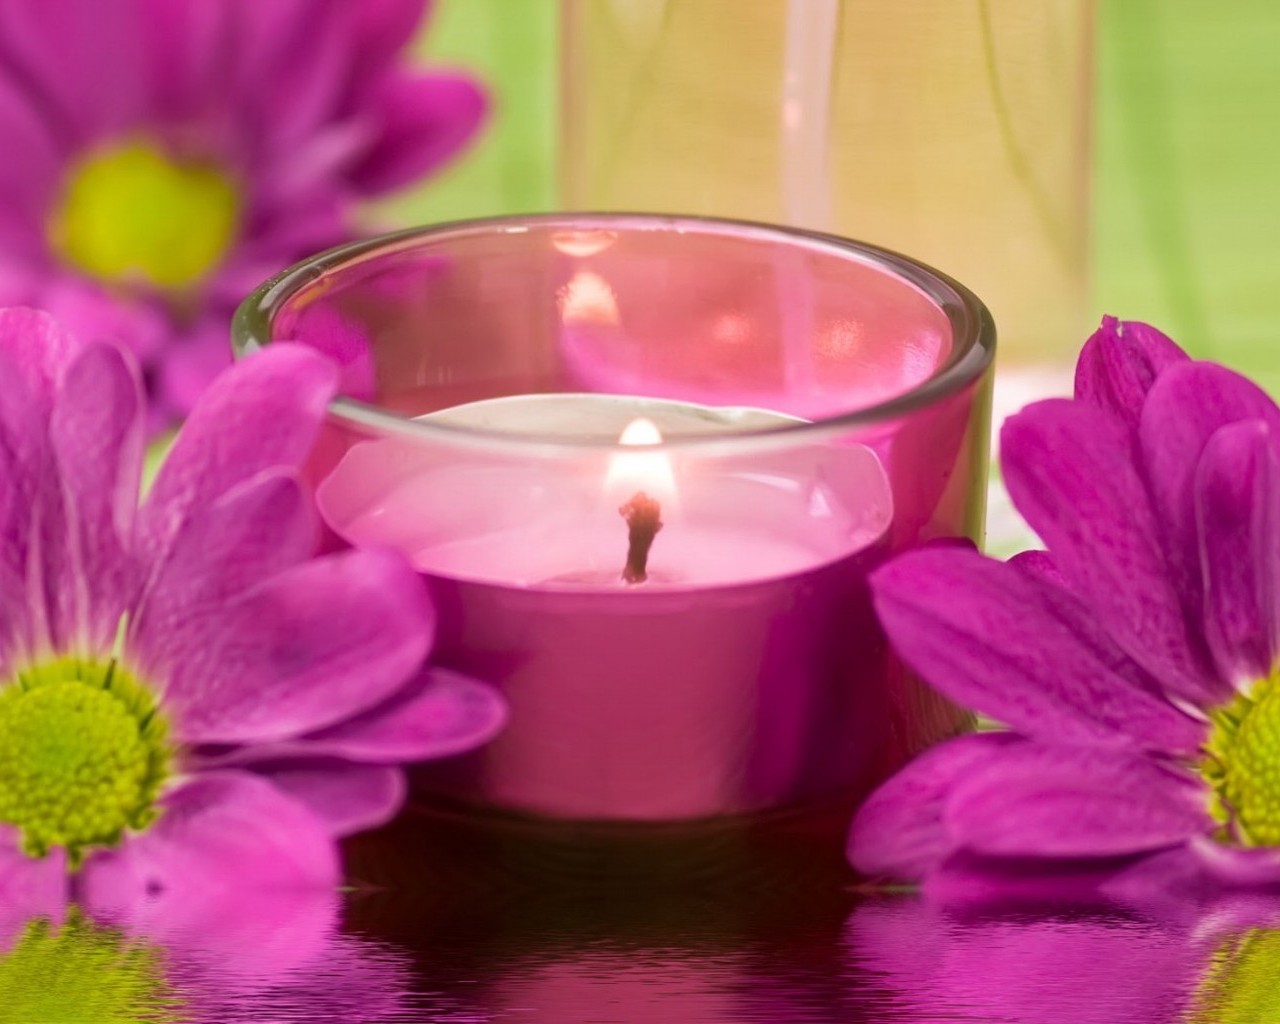 Flowers And A Candle Wallpaper On Desktop Puter